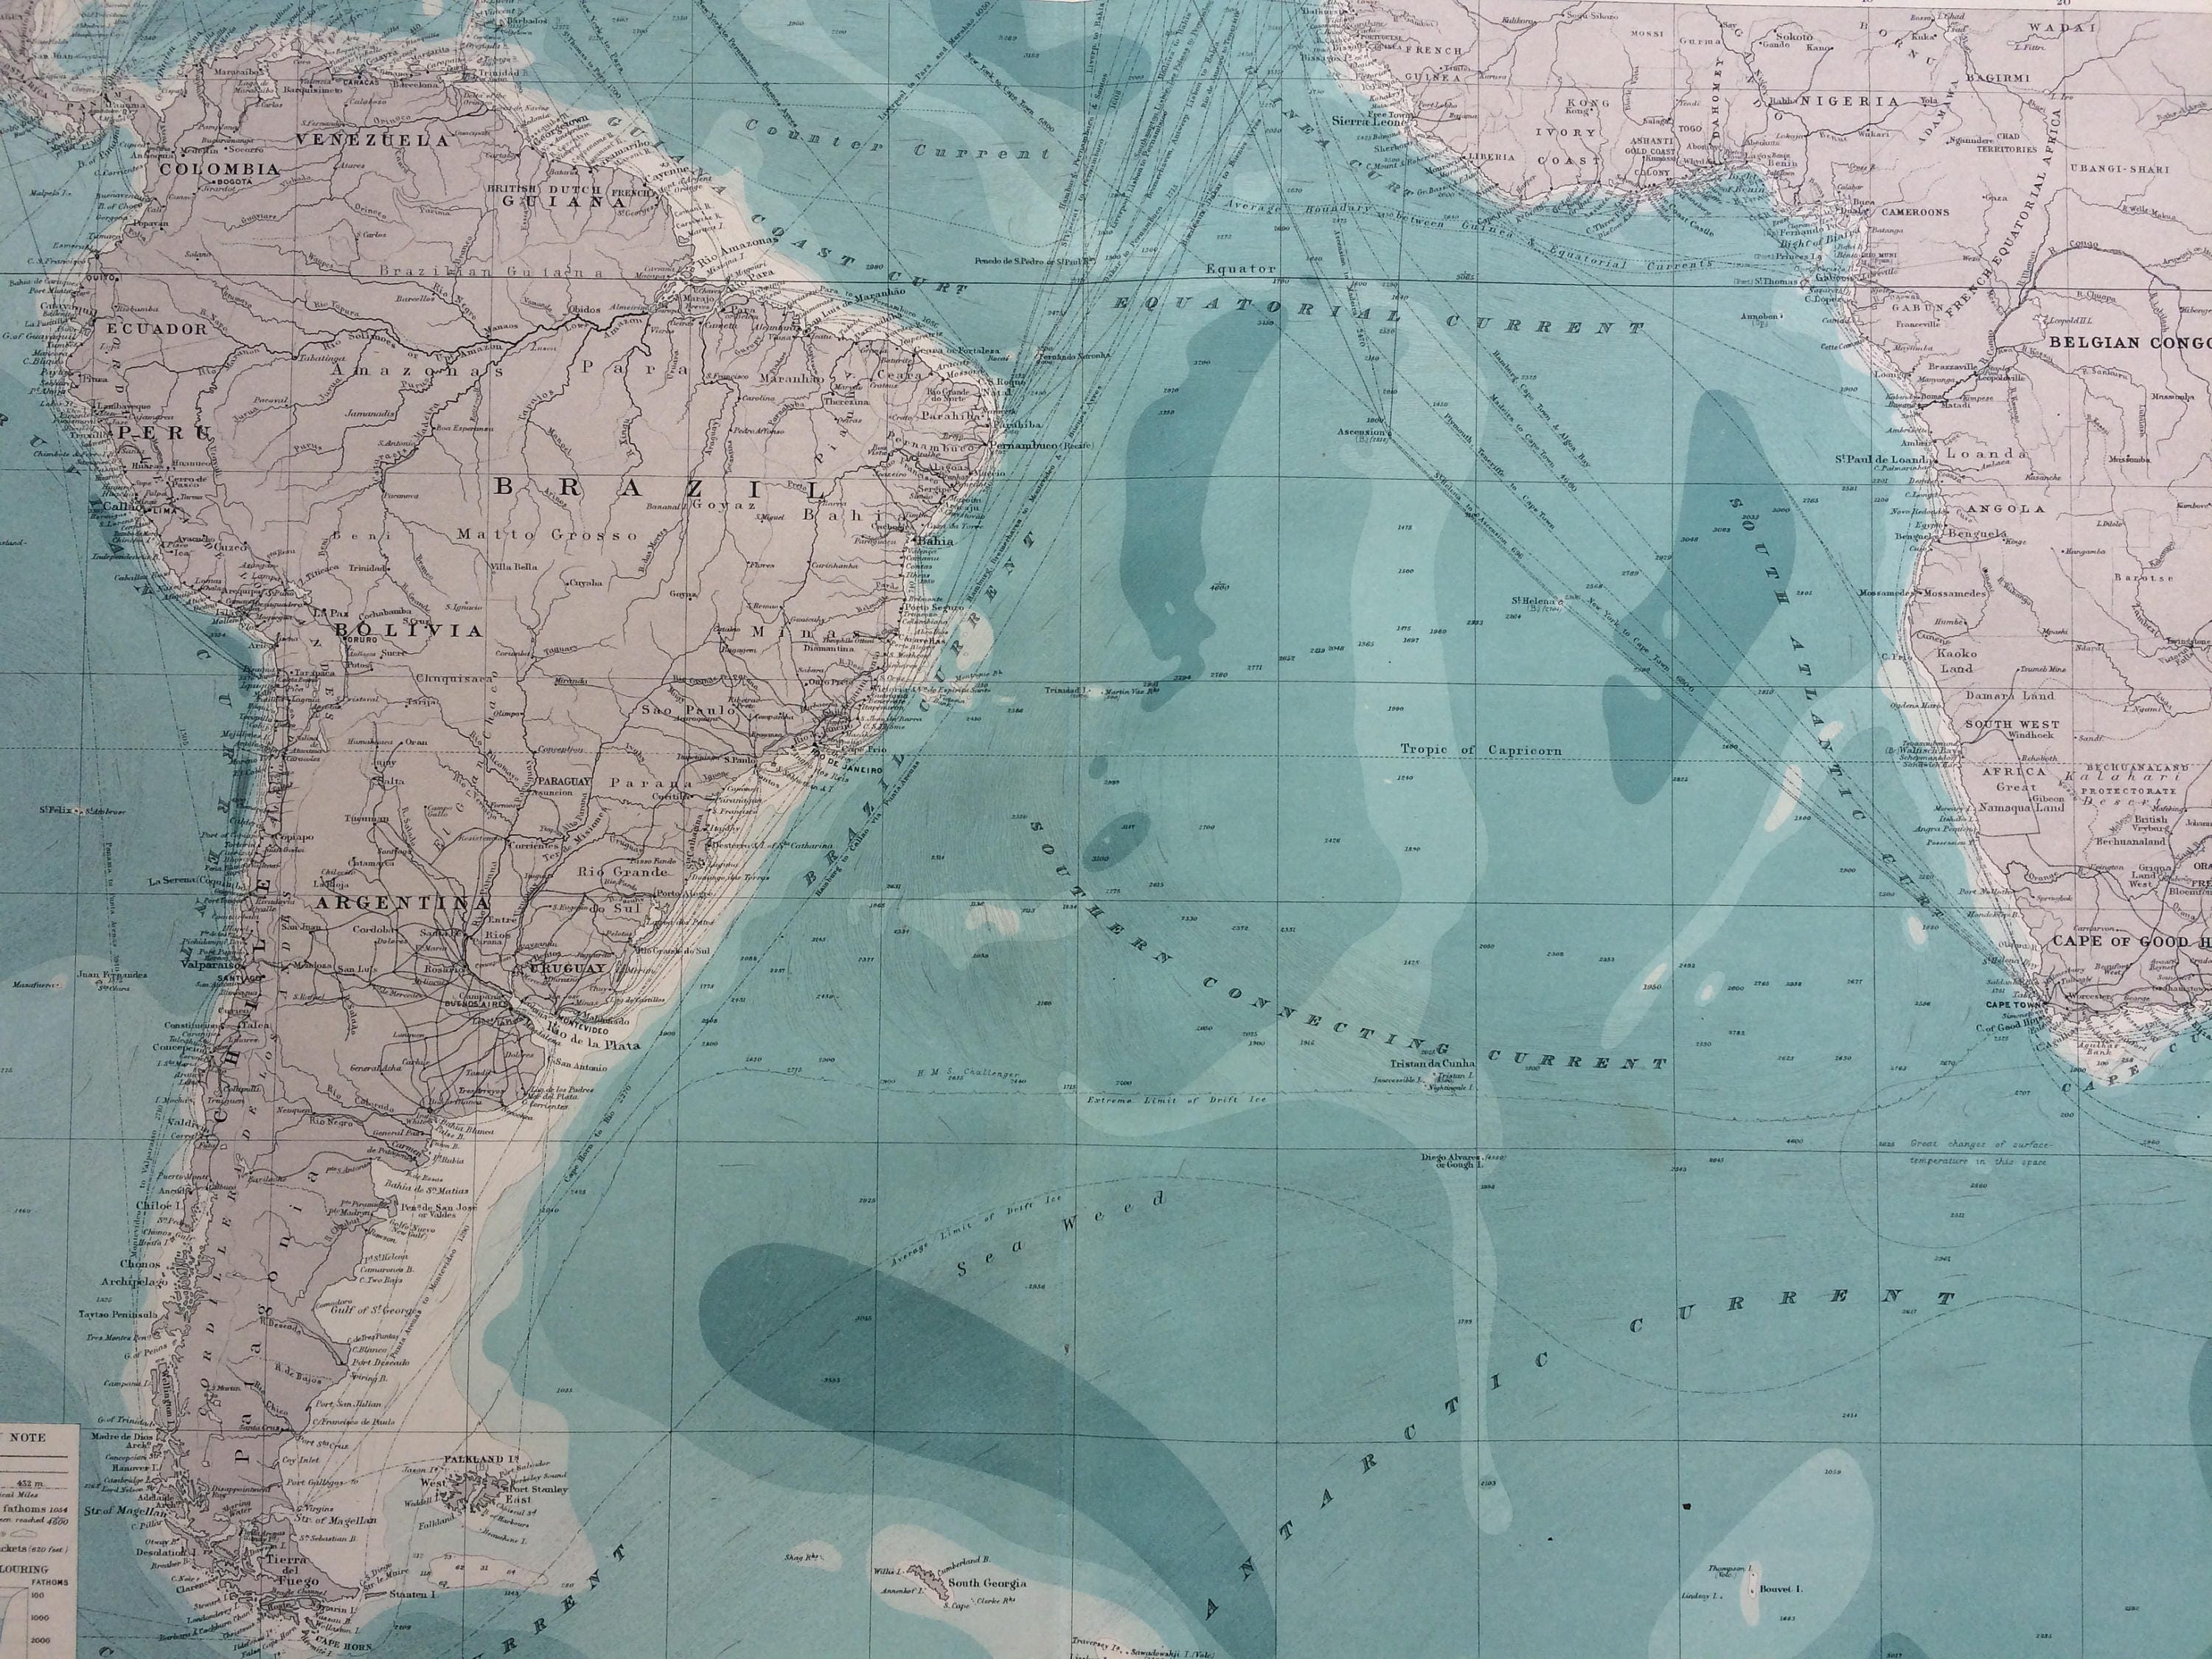 who mapped out the ocean floor in 1952